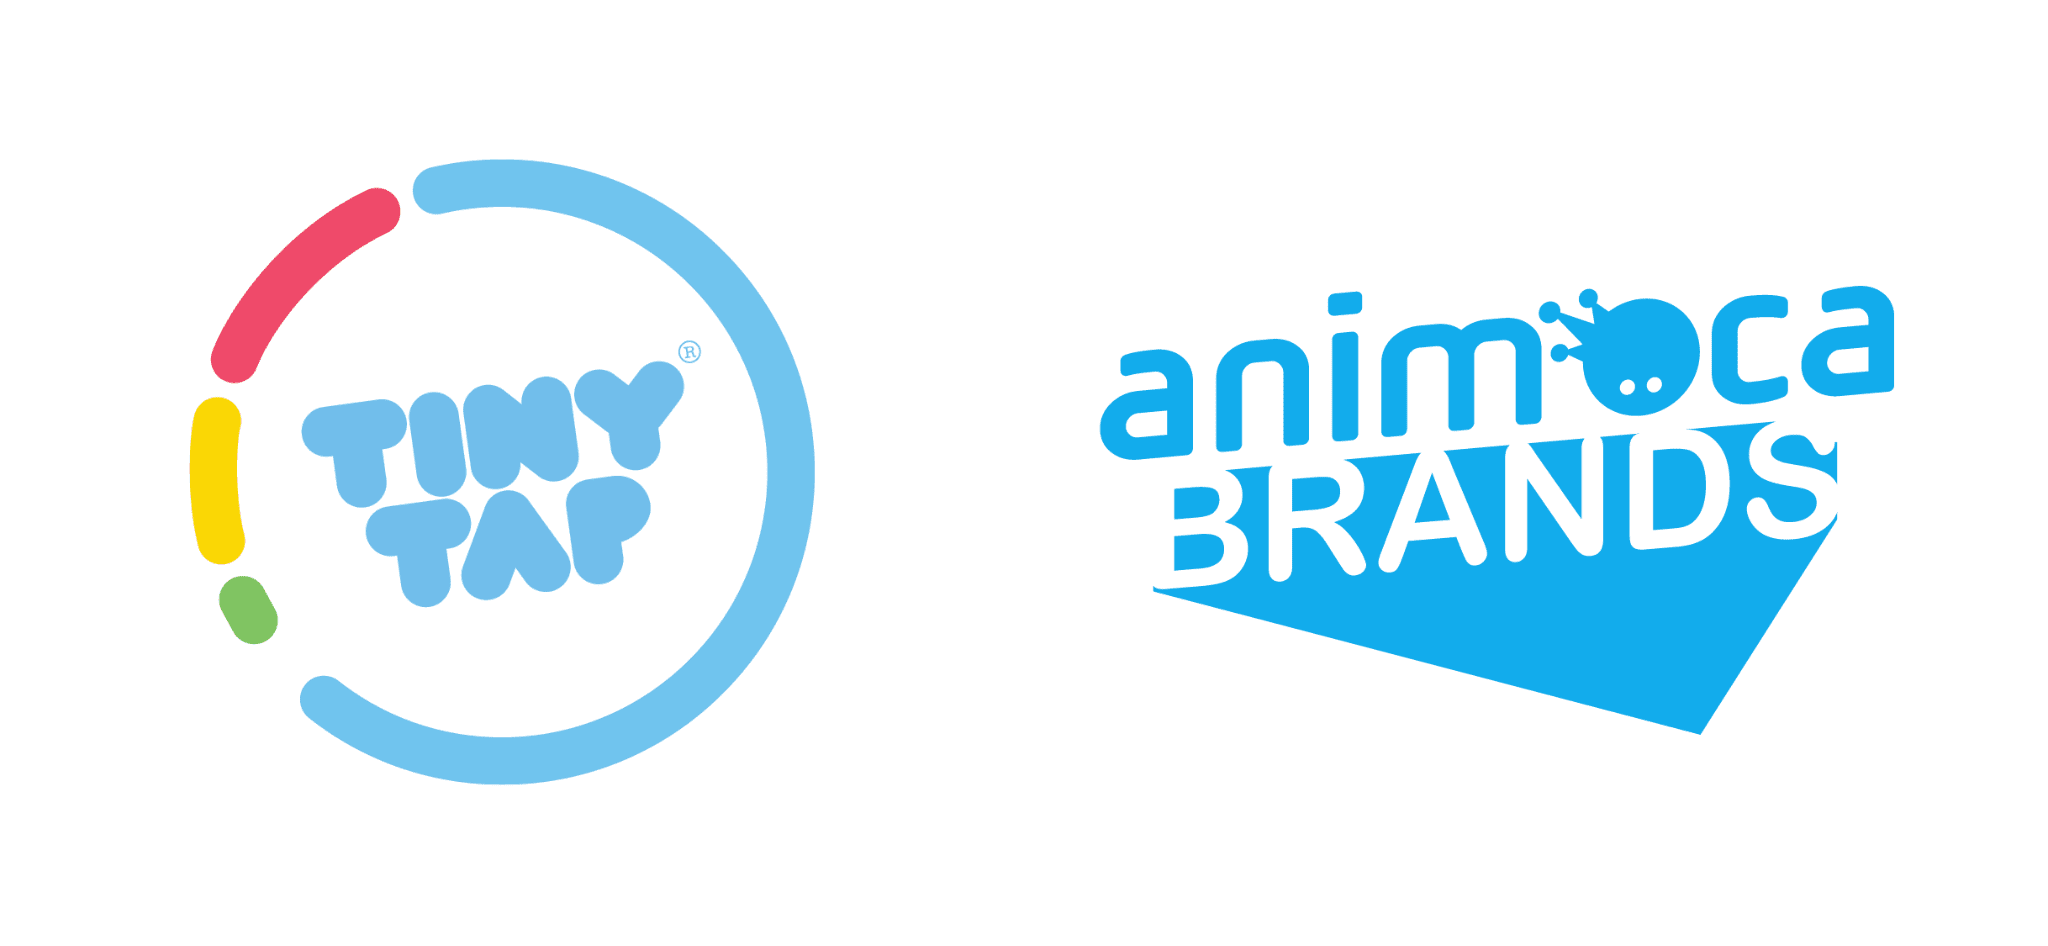 Animoca Brands acquires TinyTap, the leading platform for user generated educational content